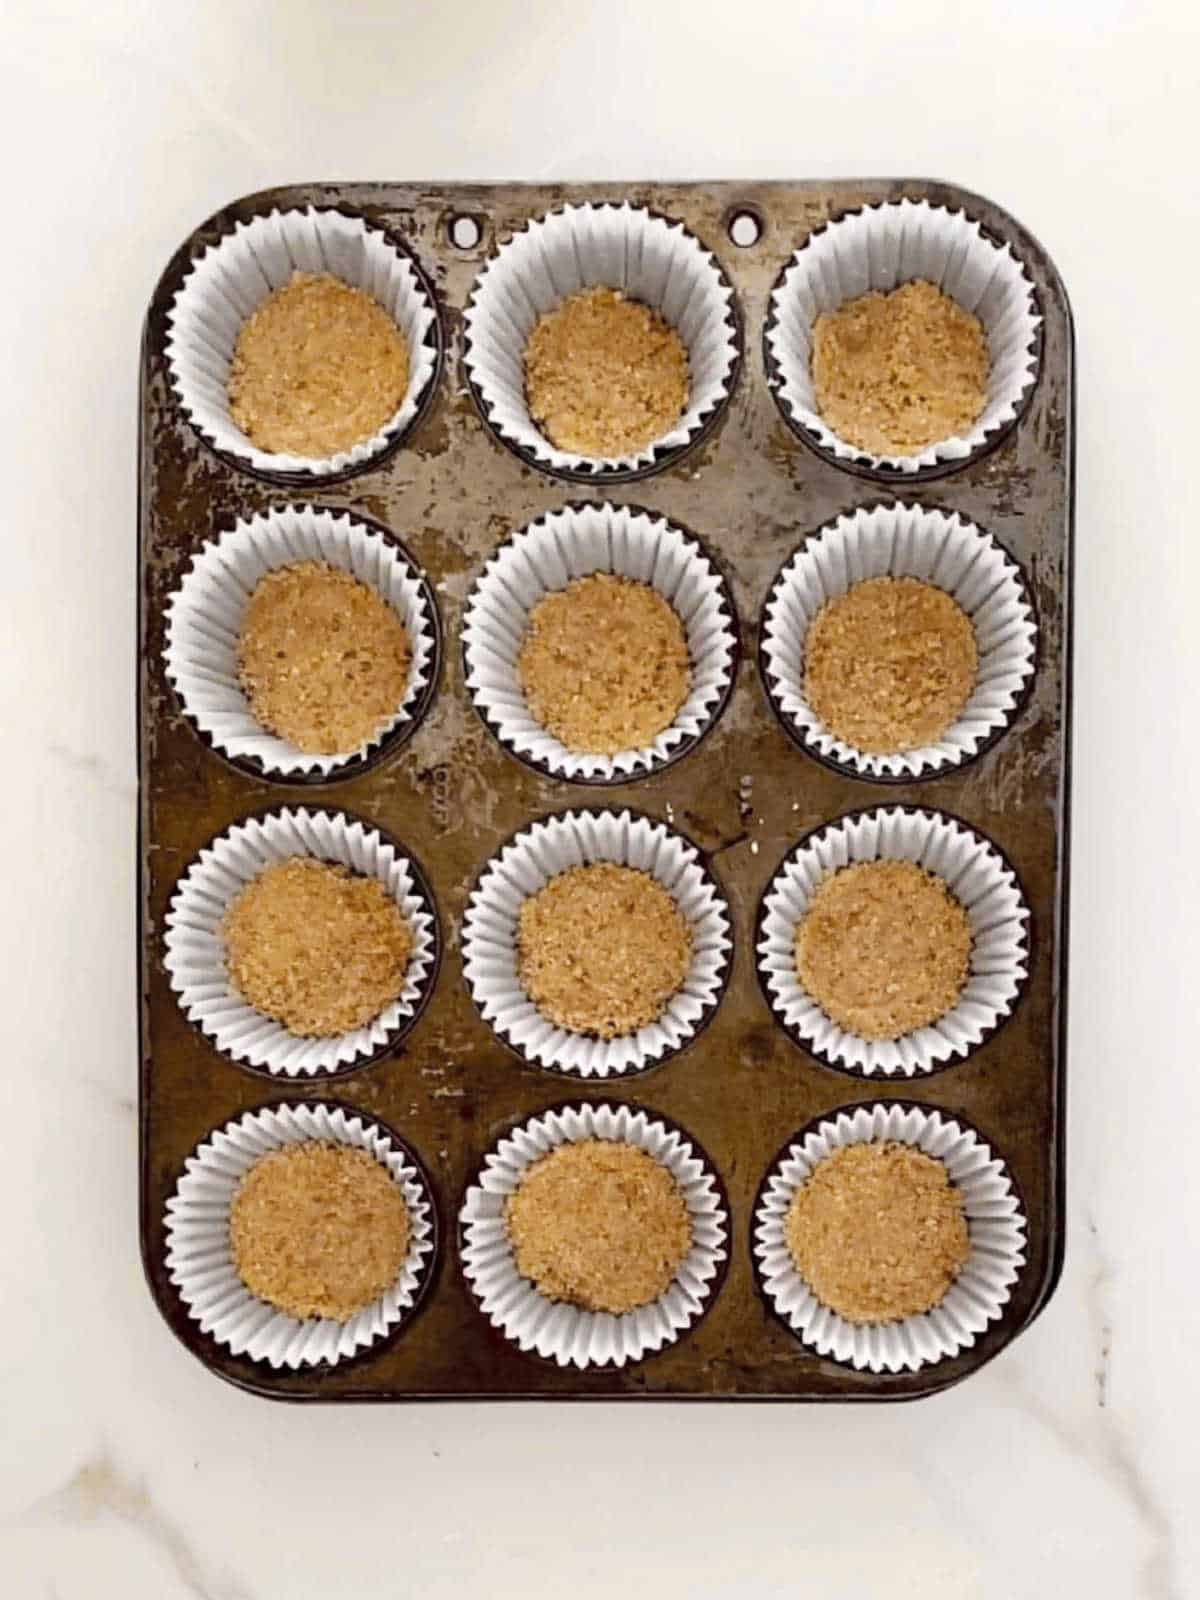 Metal muffin pan with paper liners and pressed crumb crust. White marbled surface.